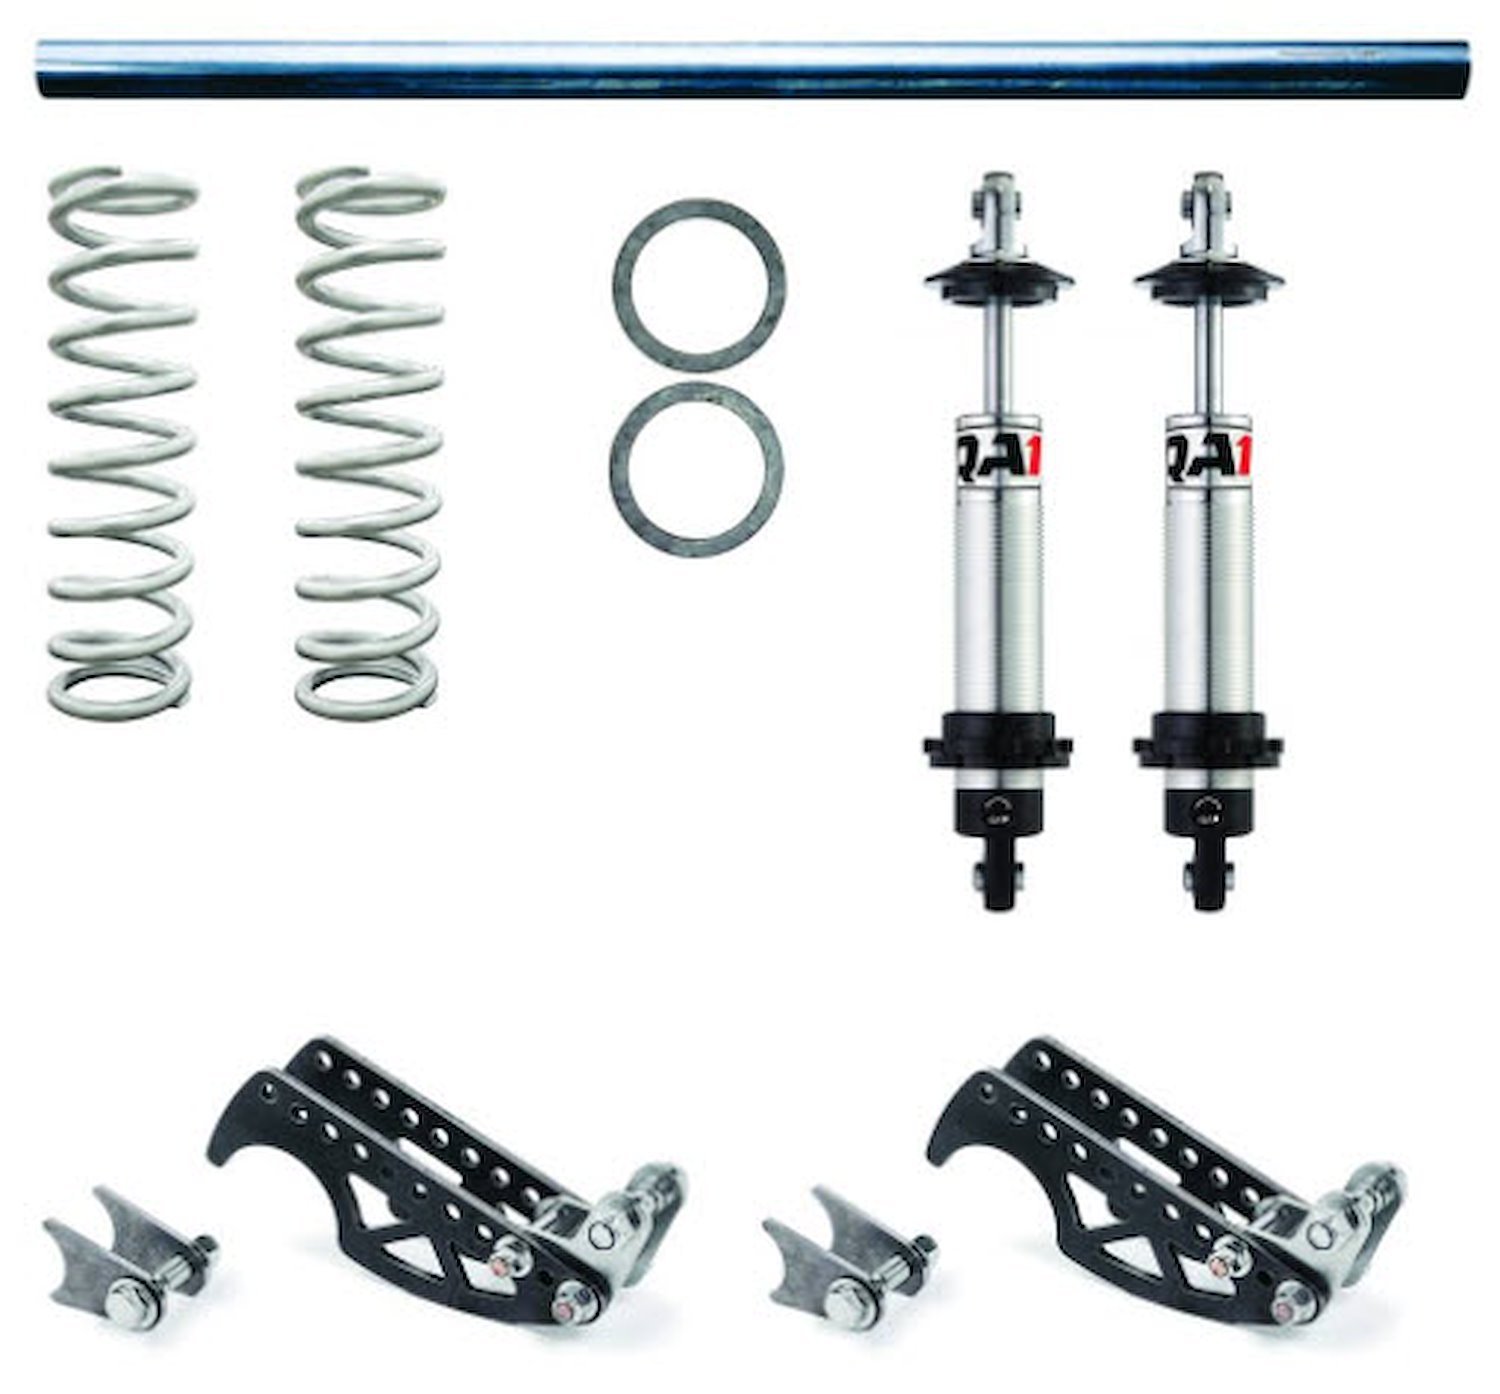 DS501-2501 Heavy-Duty Pro Rear Coil-Over Conversion System for 3 1/4 in. Axle Tubes w/Single-Adjustable Shocks & 250 lb. Springs